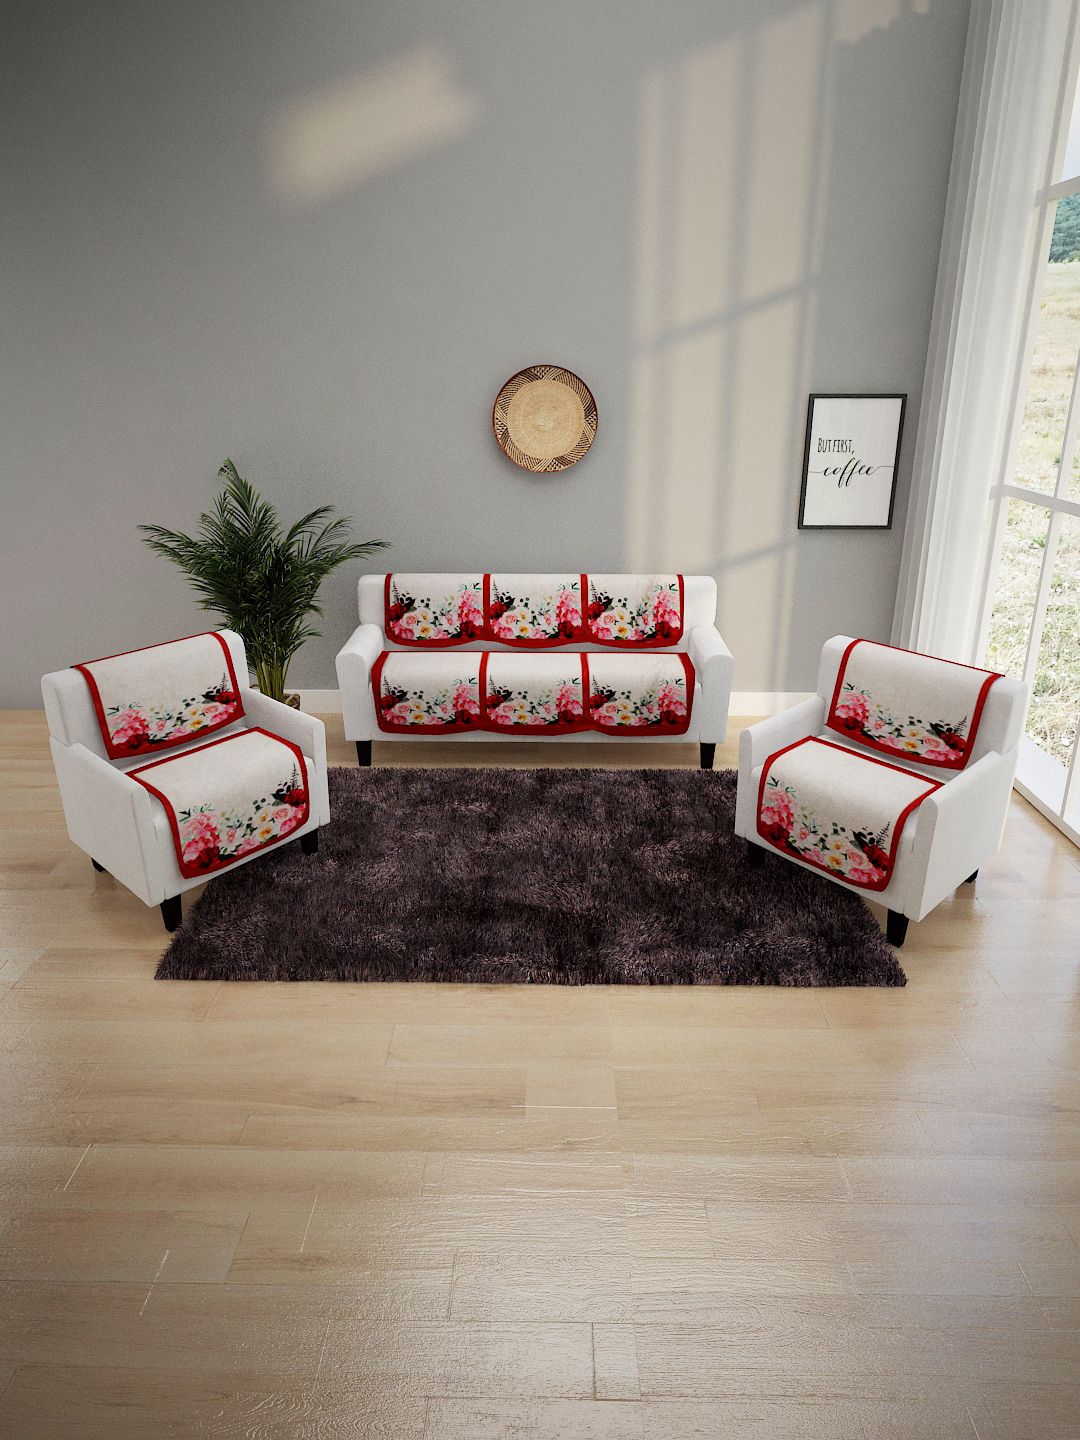 ROMEE Beige & Maroon Floral Design 5 Seater Sofa Cover Price in India